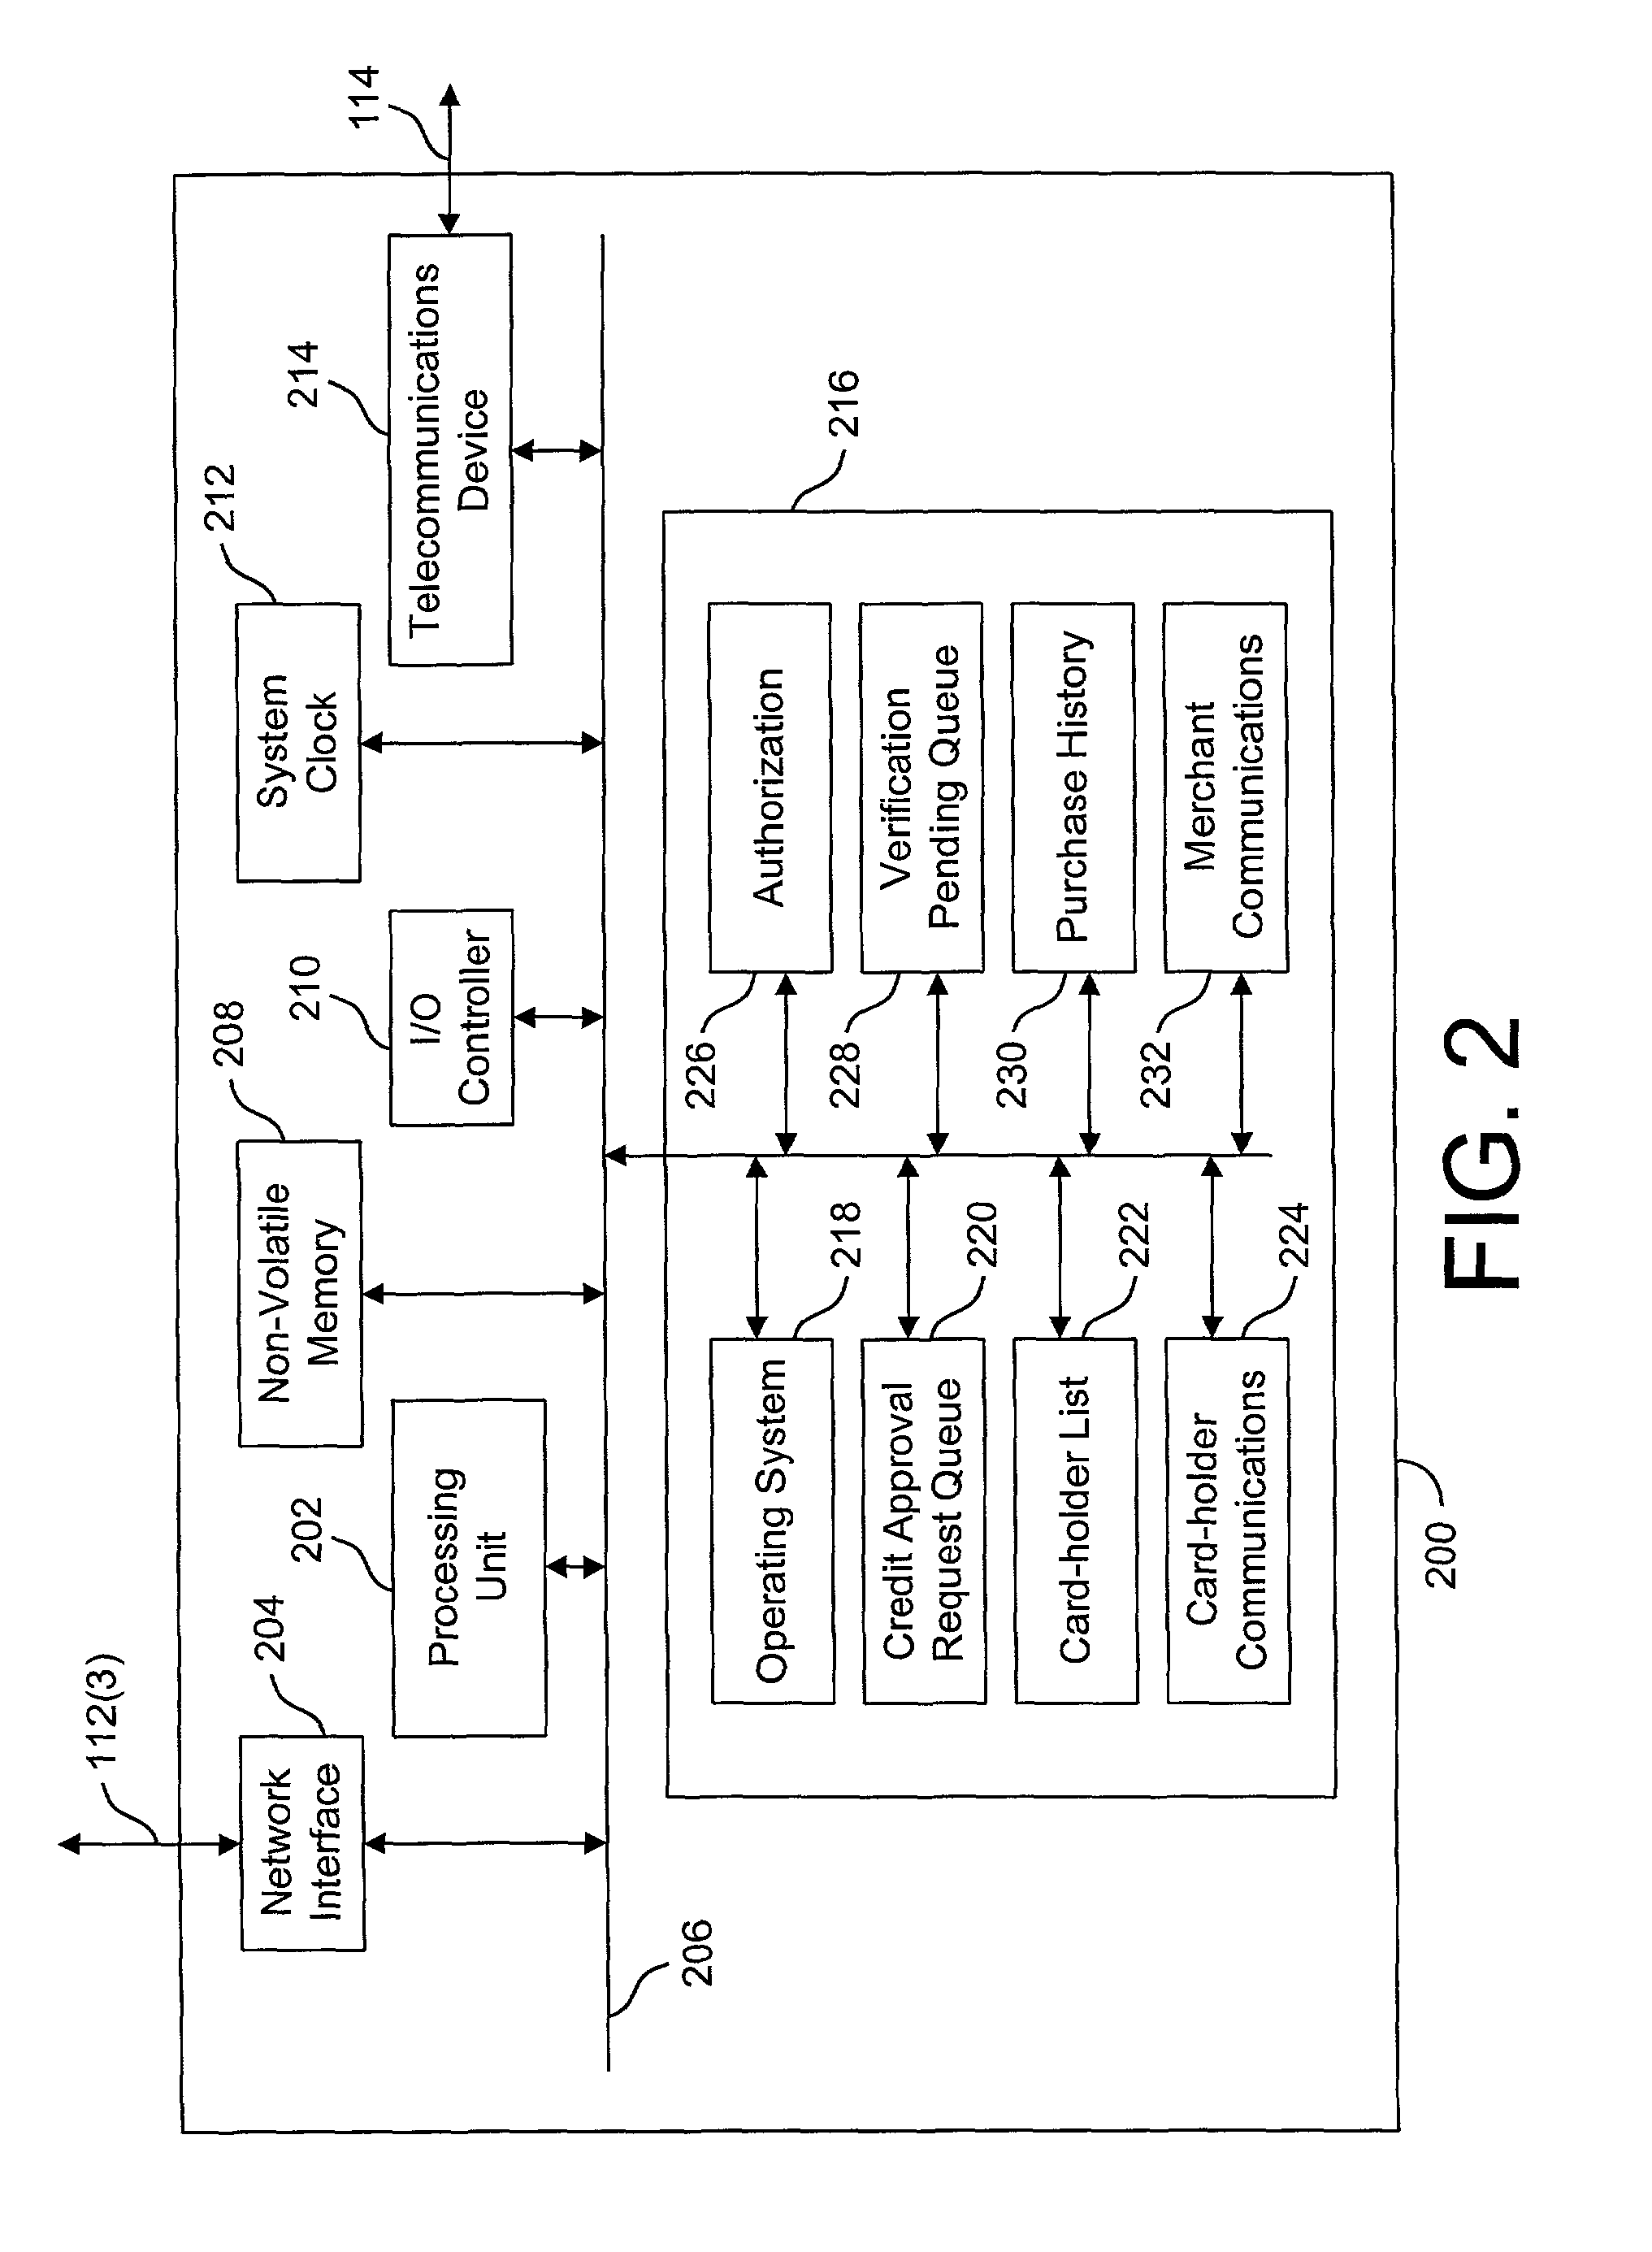 System and method for pre-verifying commercial transactions